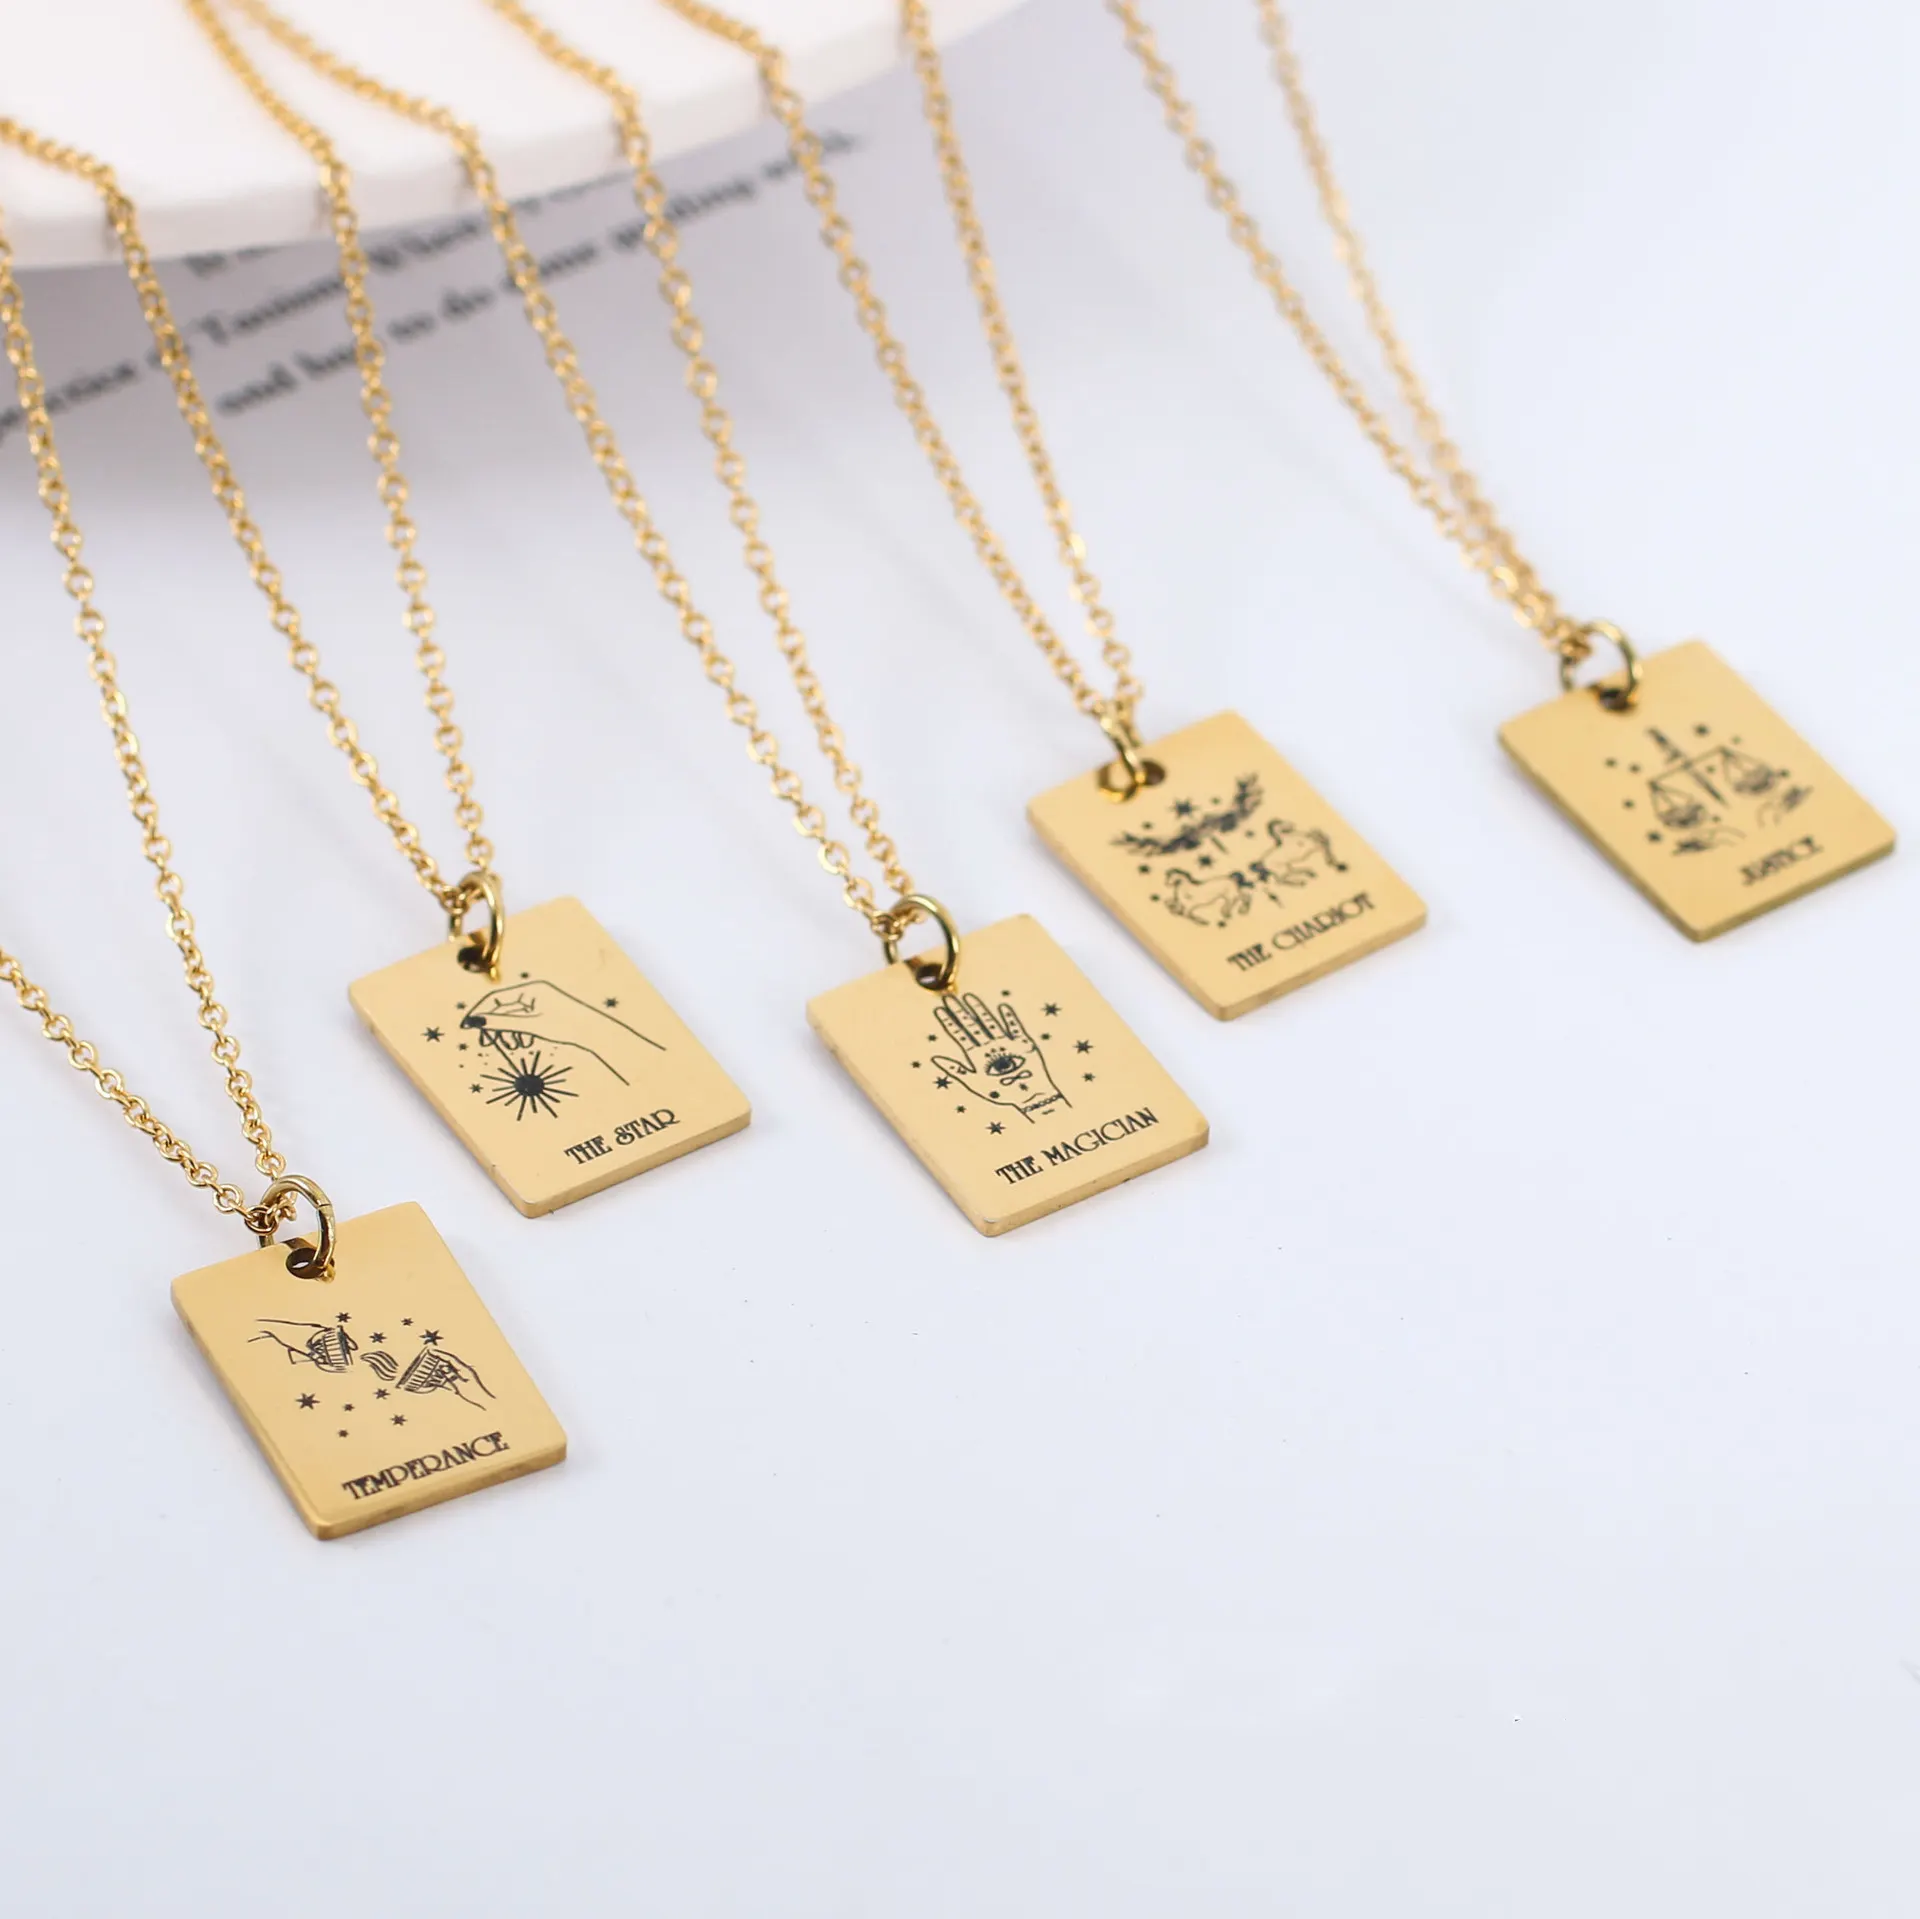 18k Gold Plated Jewelry Necklace Artistic Tarot Pendant Necklace For Women Stylish Stainless Steel Necklace Wholesale